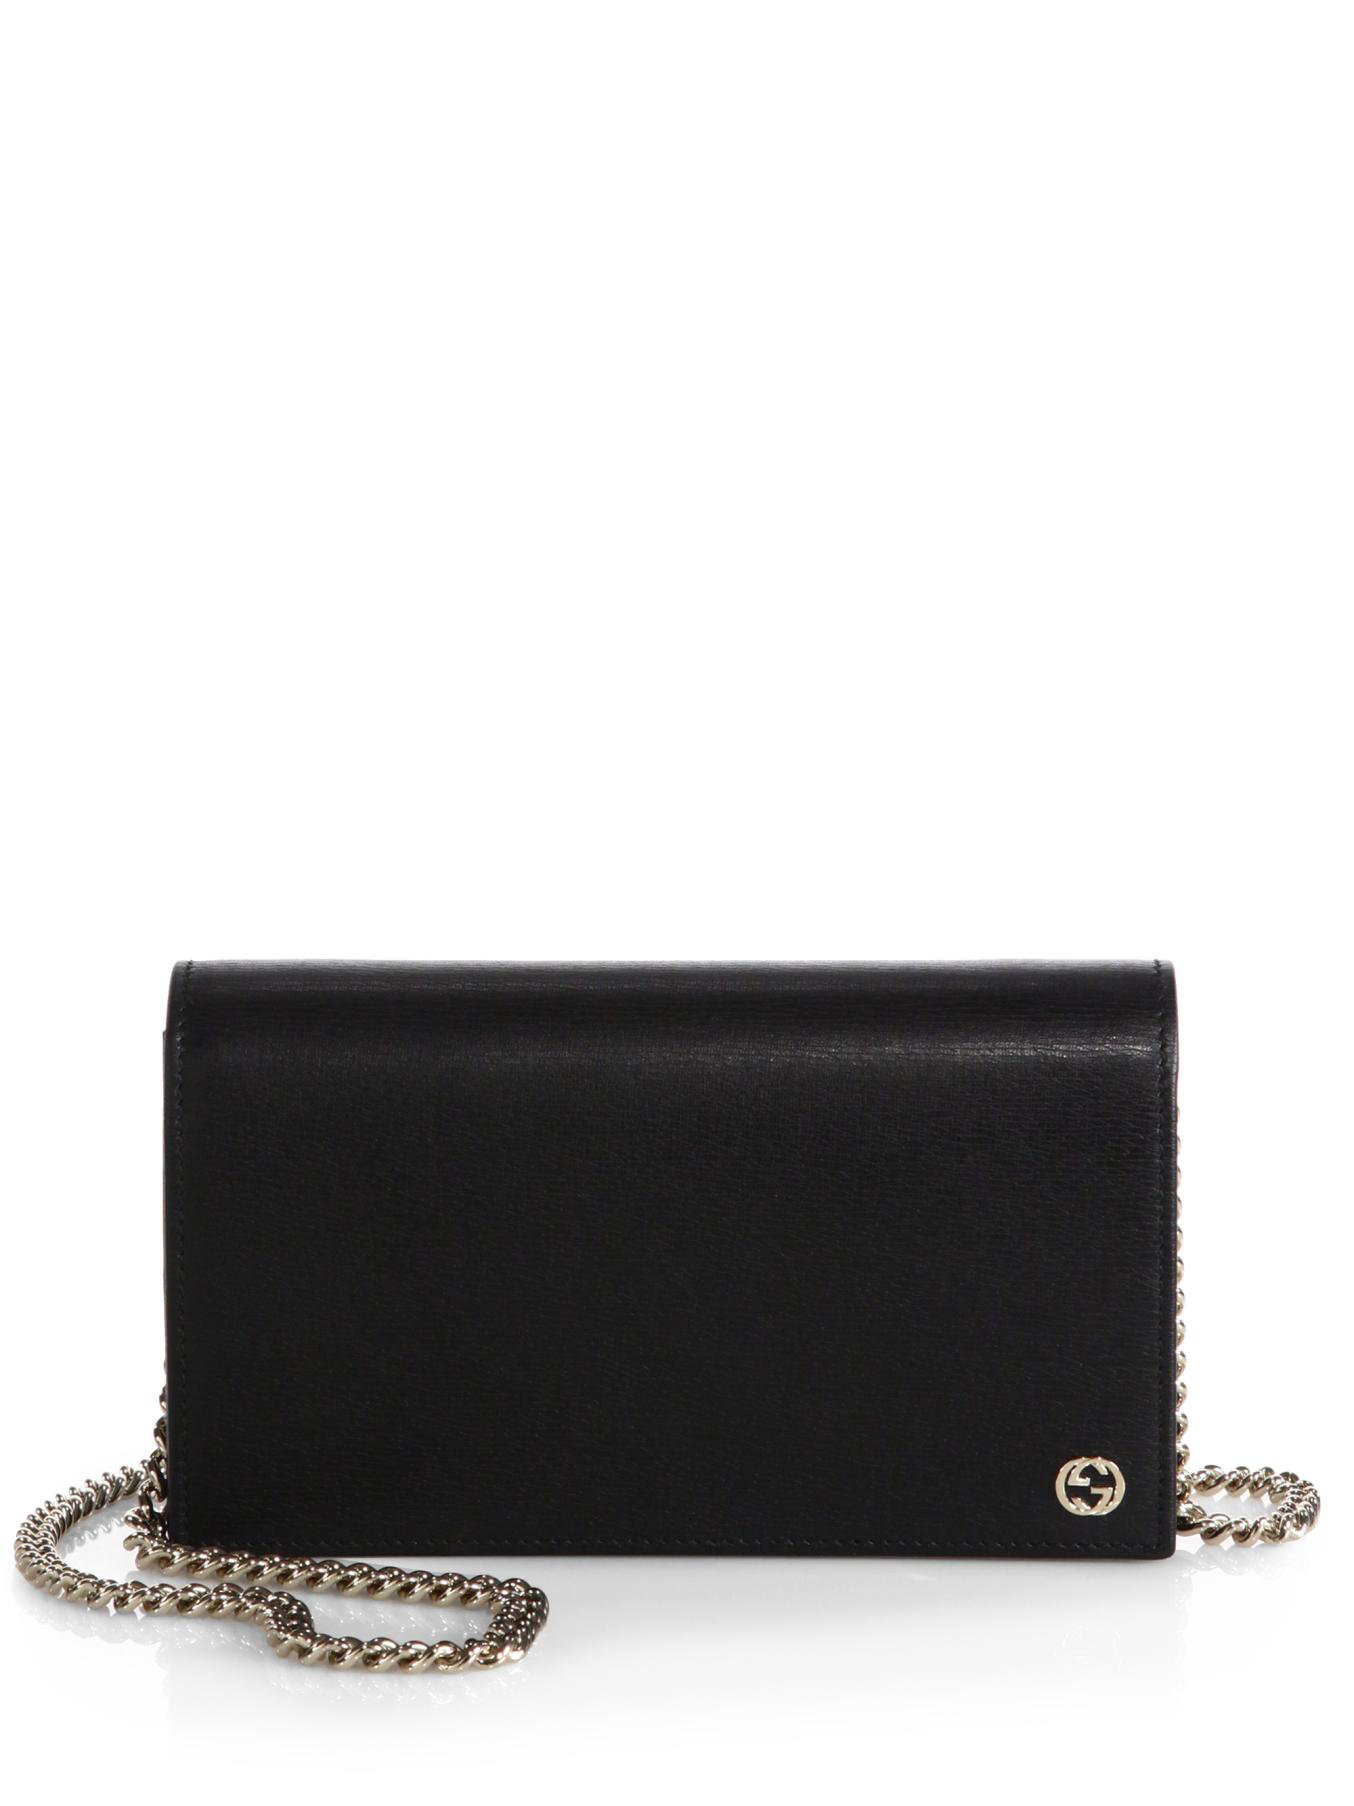 Lyst - Gucci Leather Chain Wallet in Black